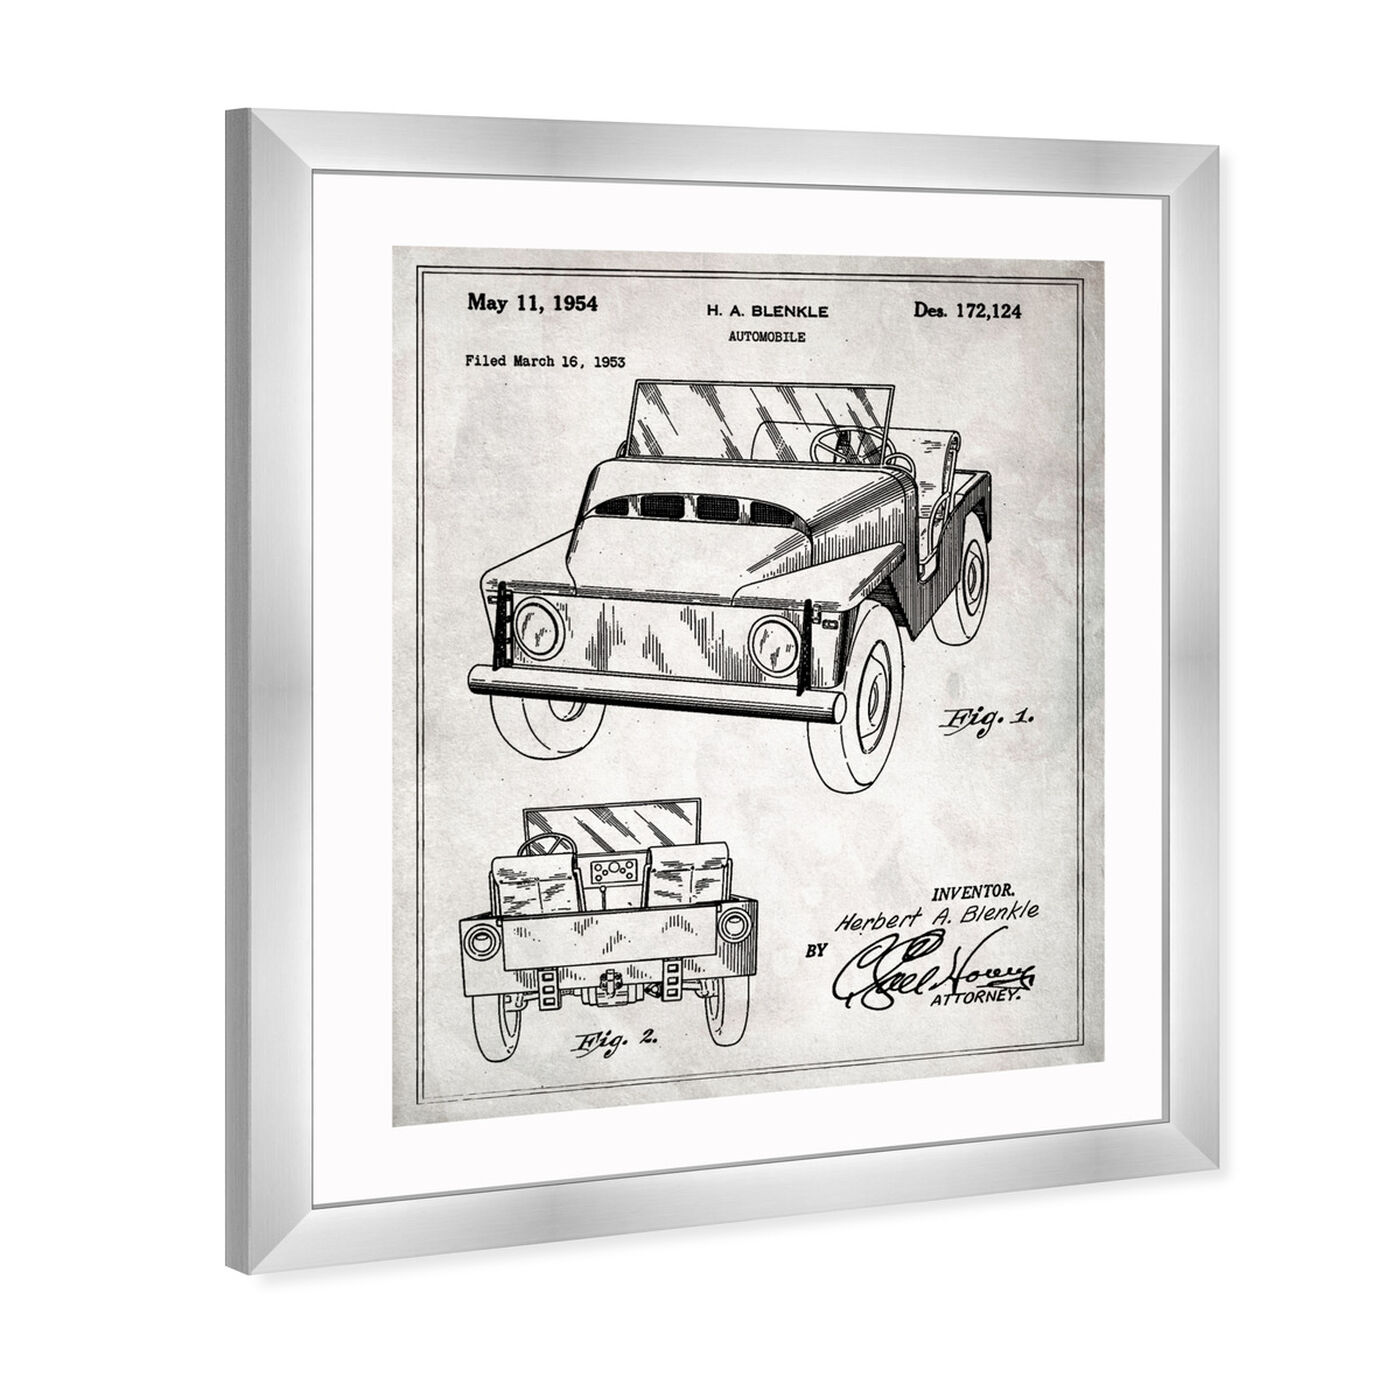 Angled view of Off-Road Vehicle 1954 featuring transportation and off-road vehicles art.